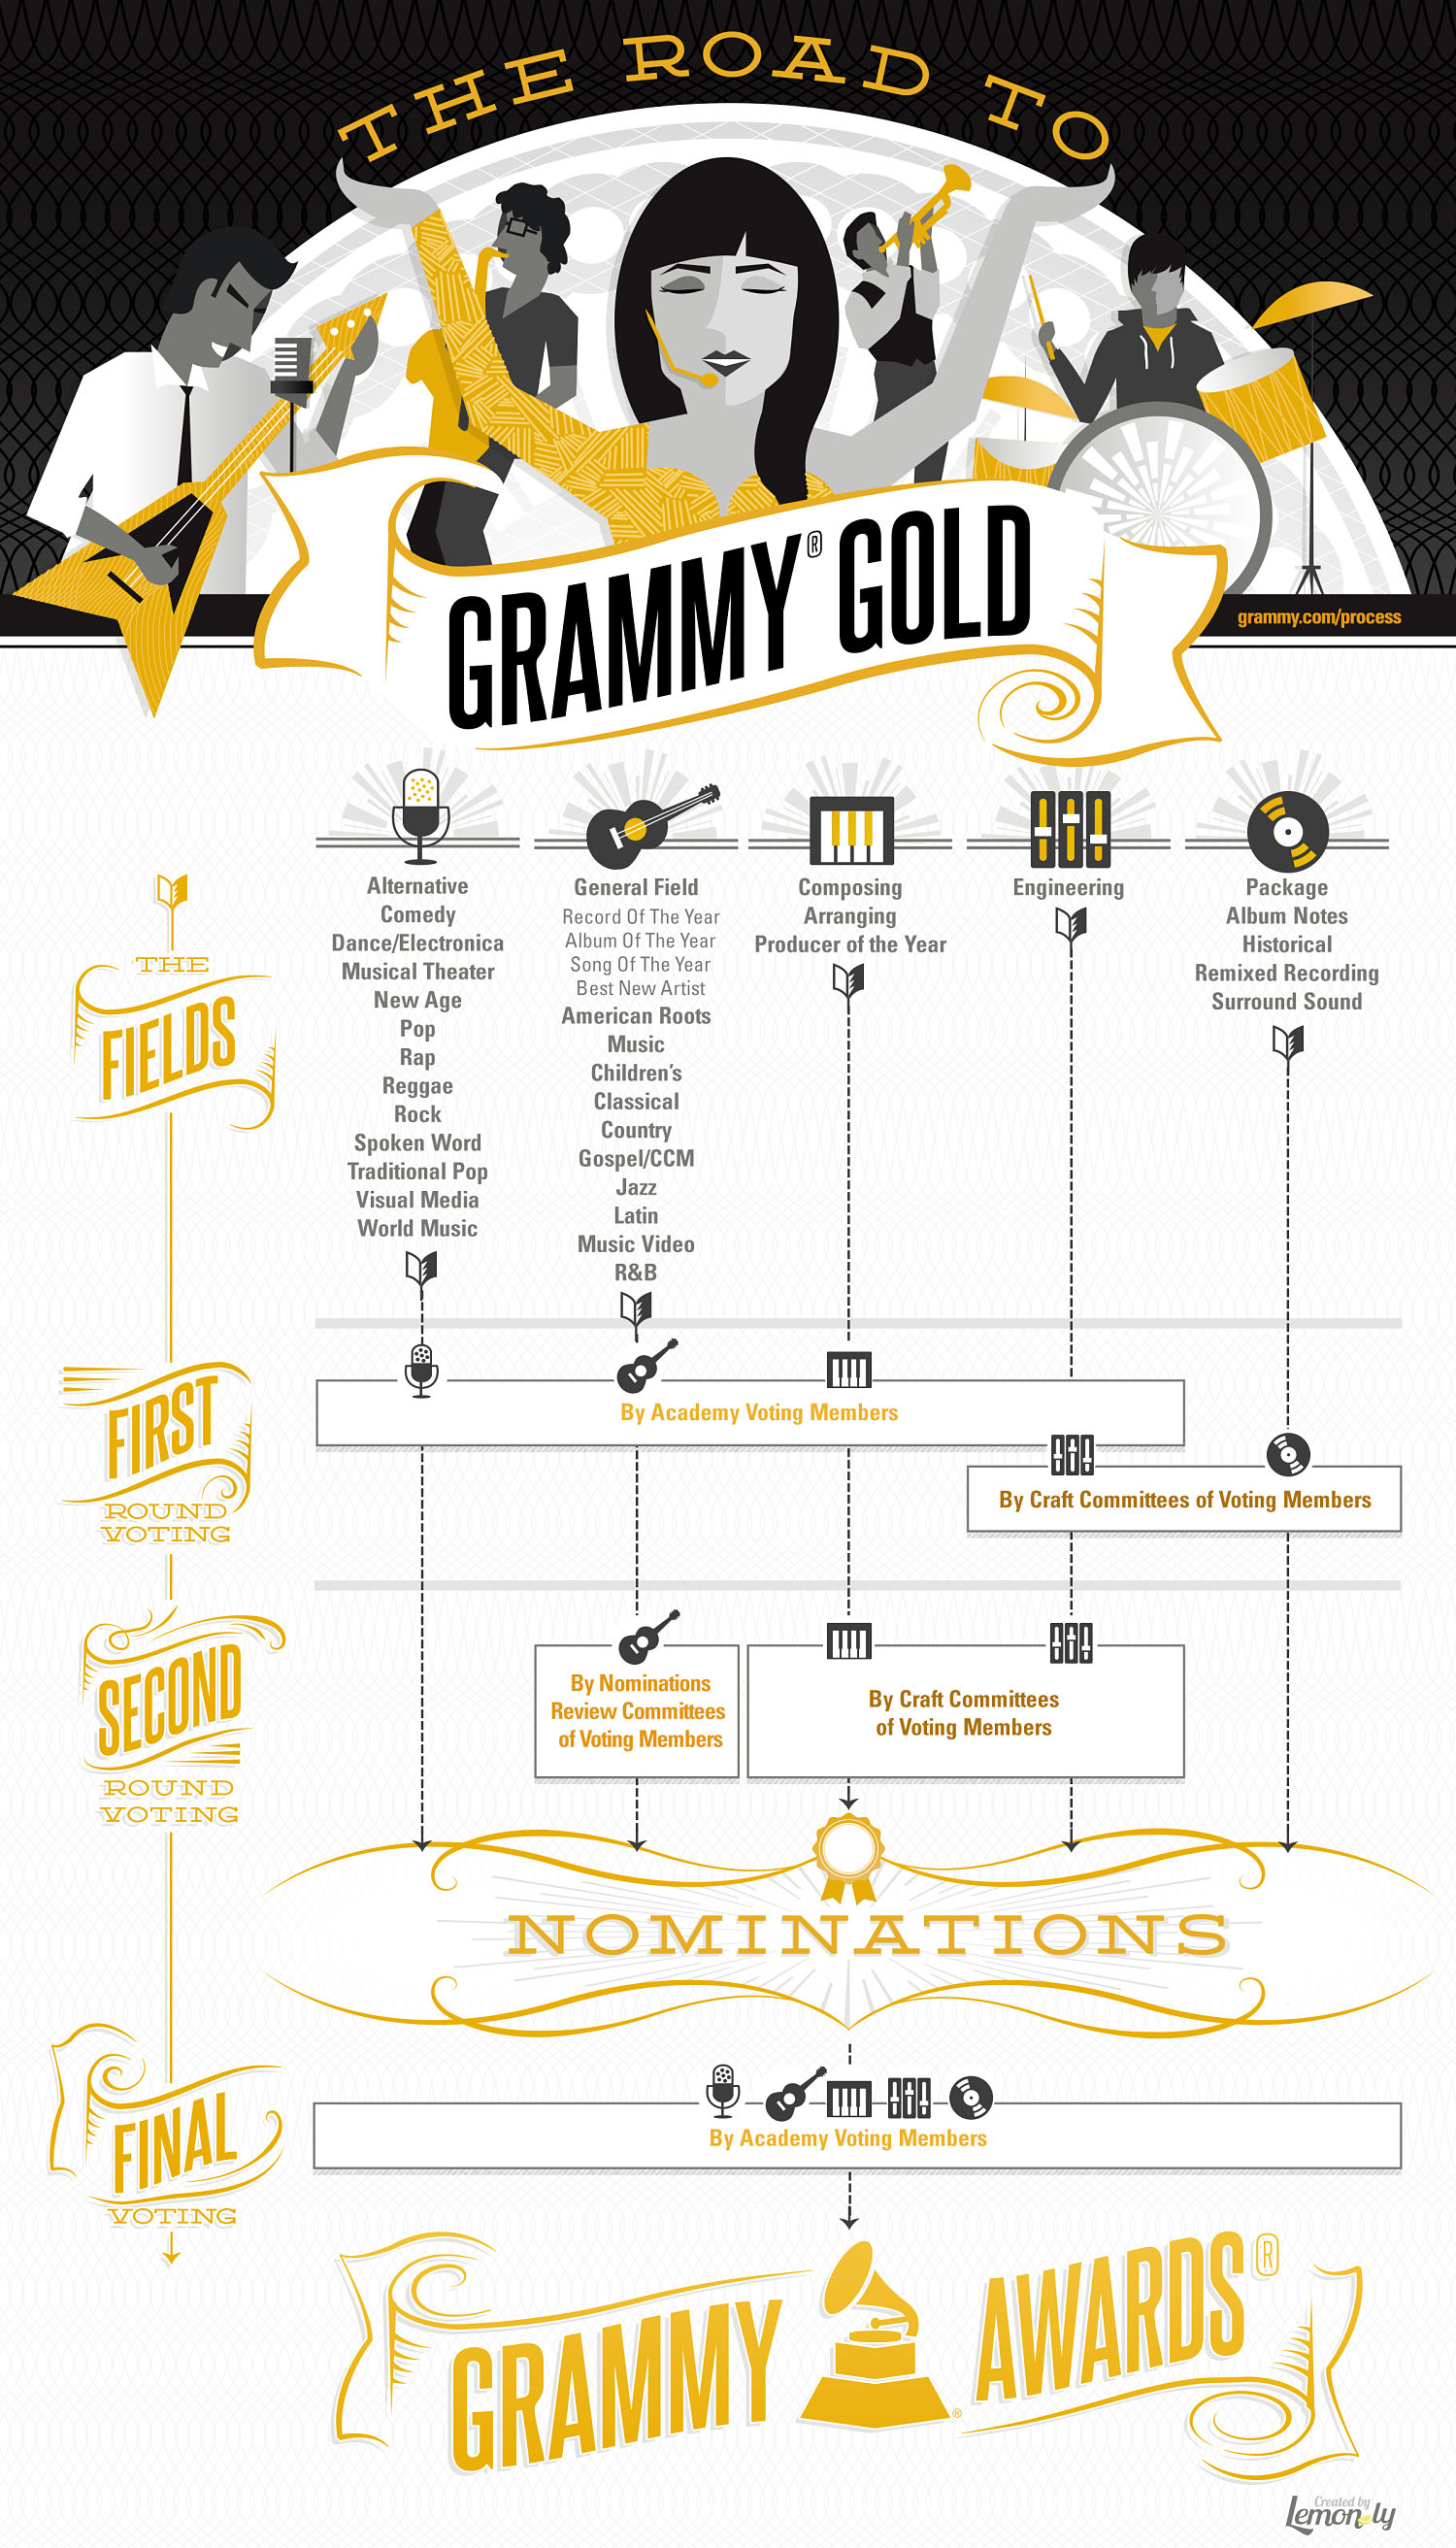 The Road To GRAMMY Gold: GRAMMY Awards Voting Process